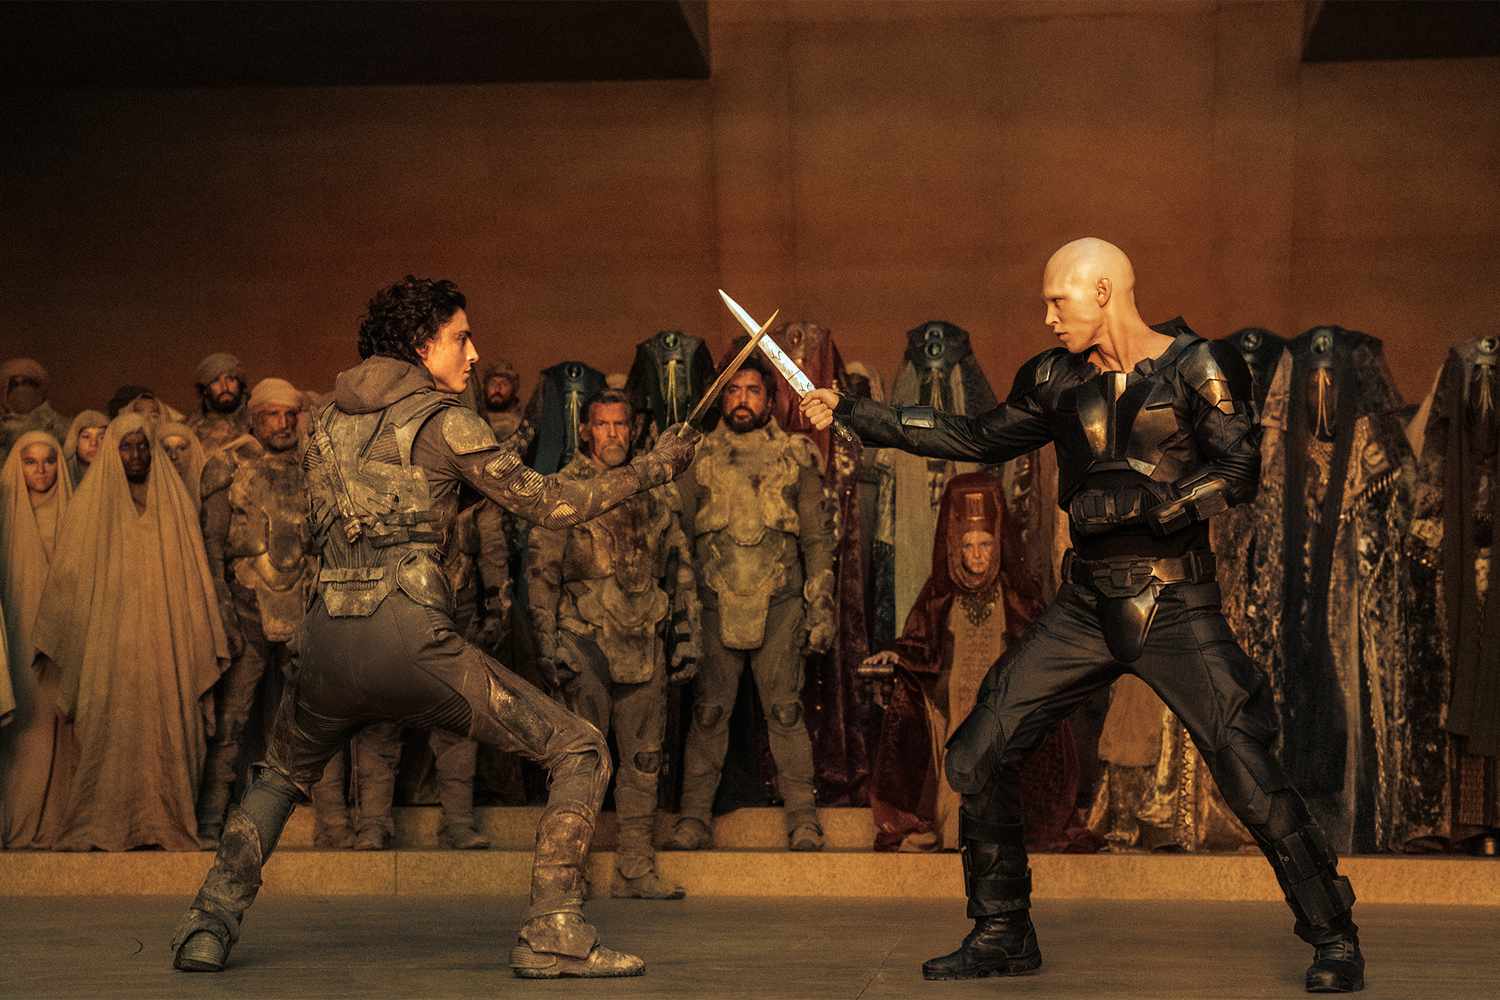 Paul and Feyd-Rautha dueling. Photo courtesy of Legendary Pictures